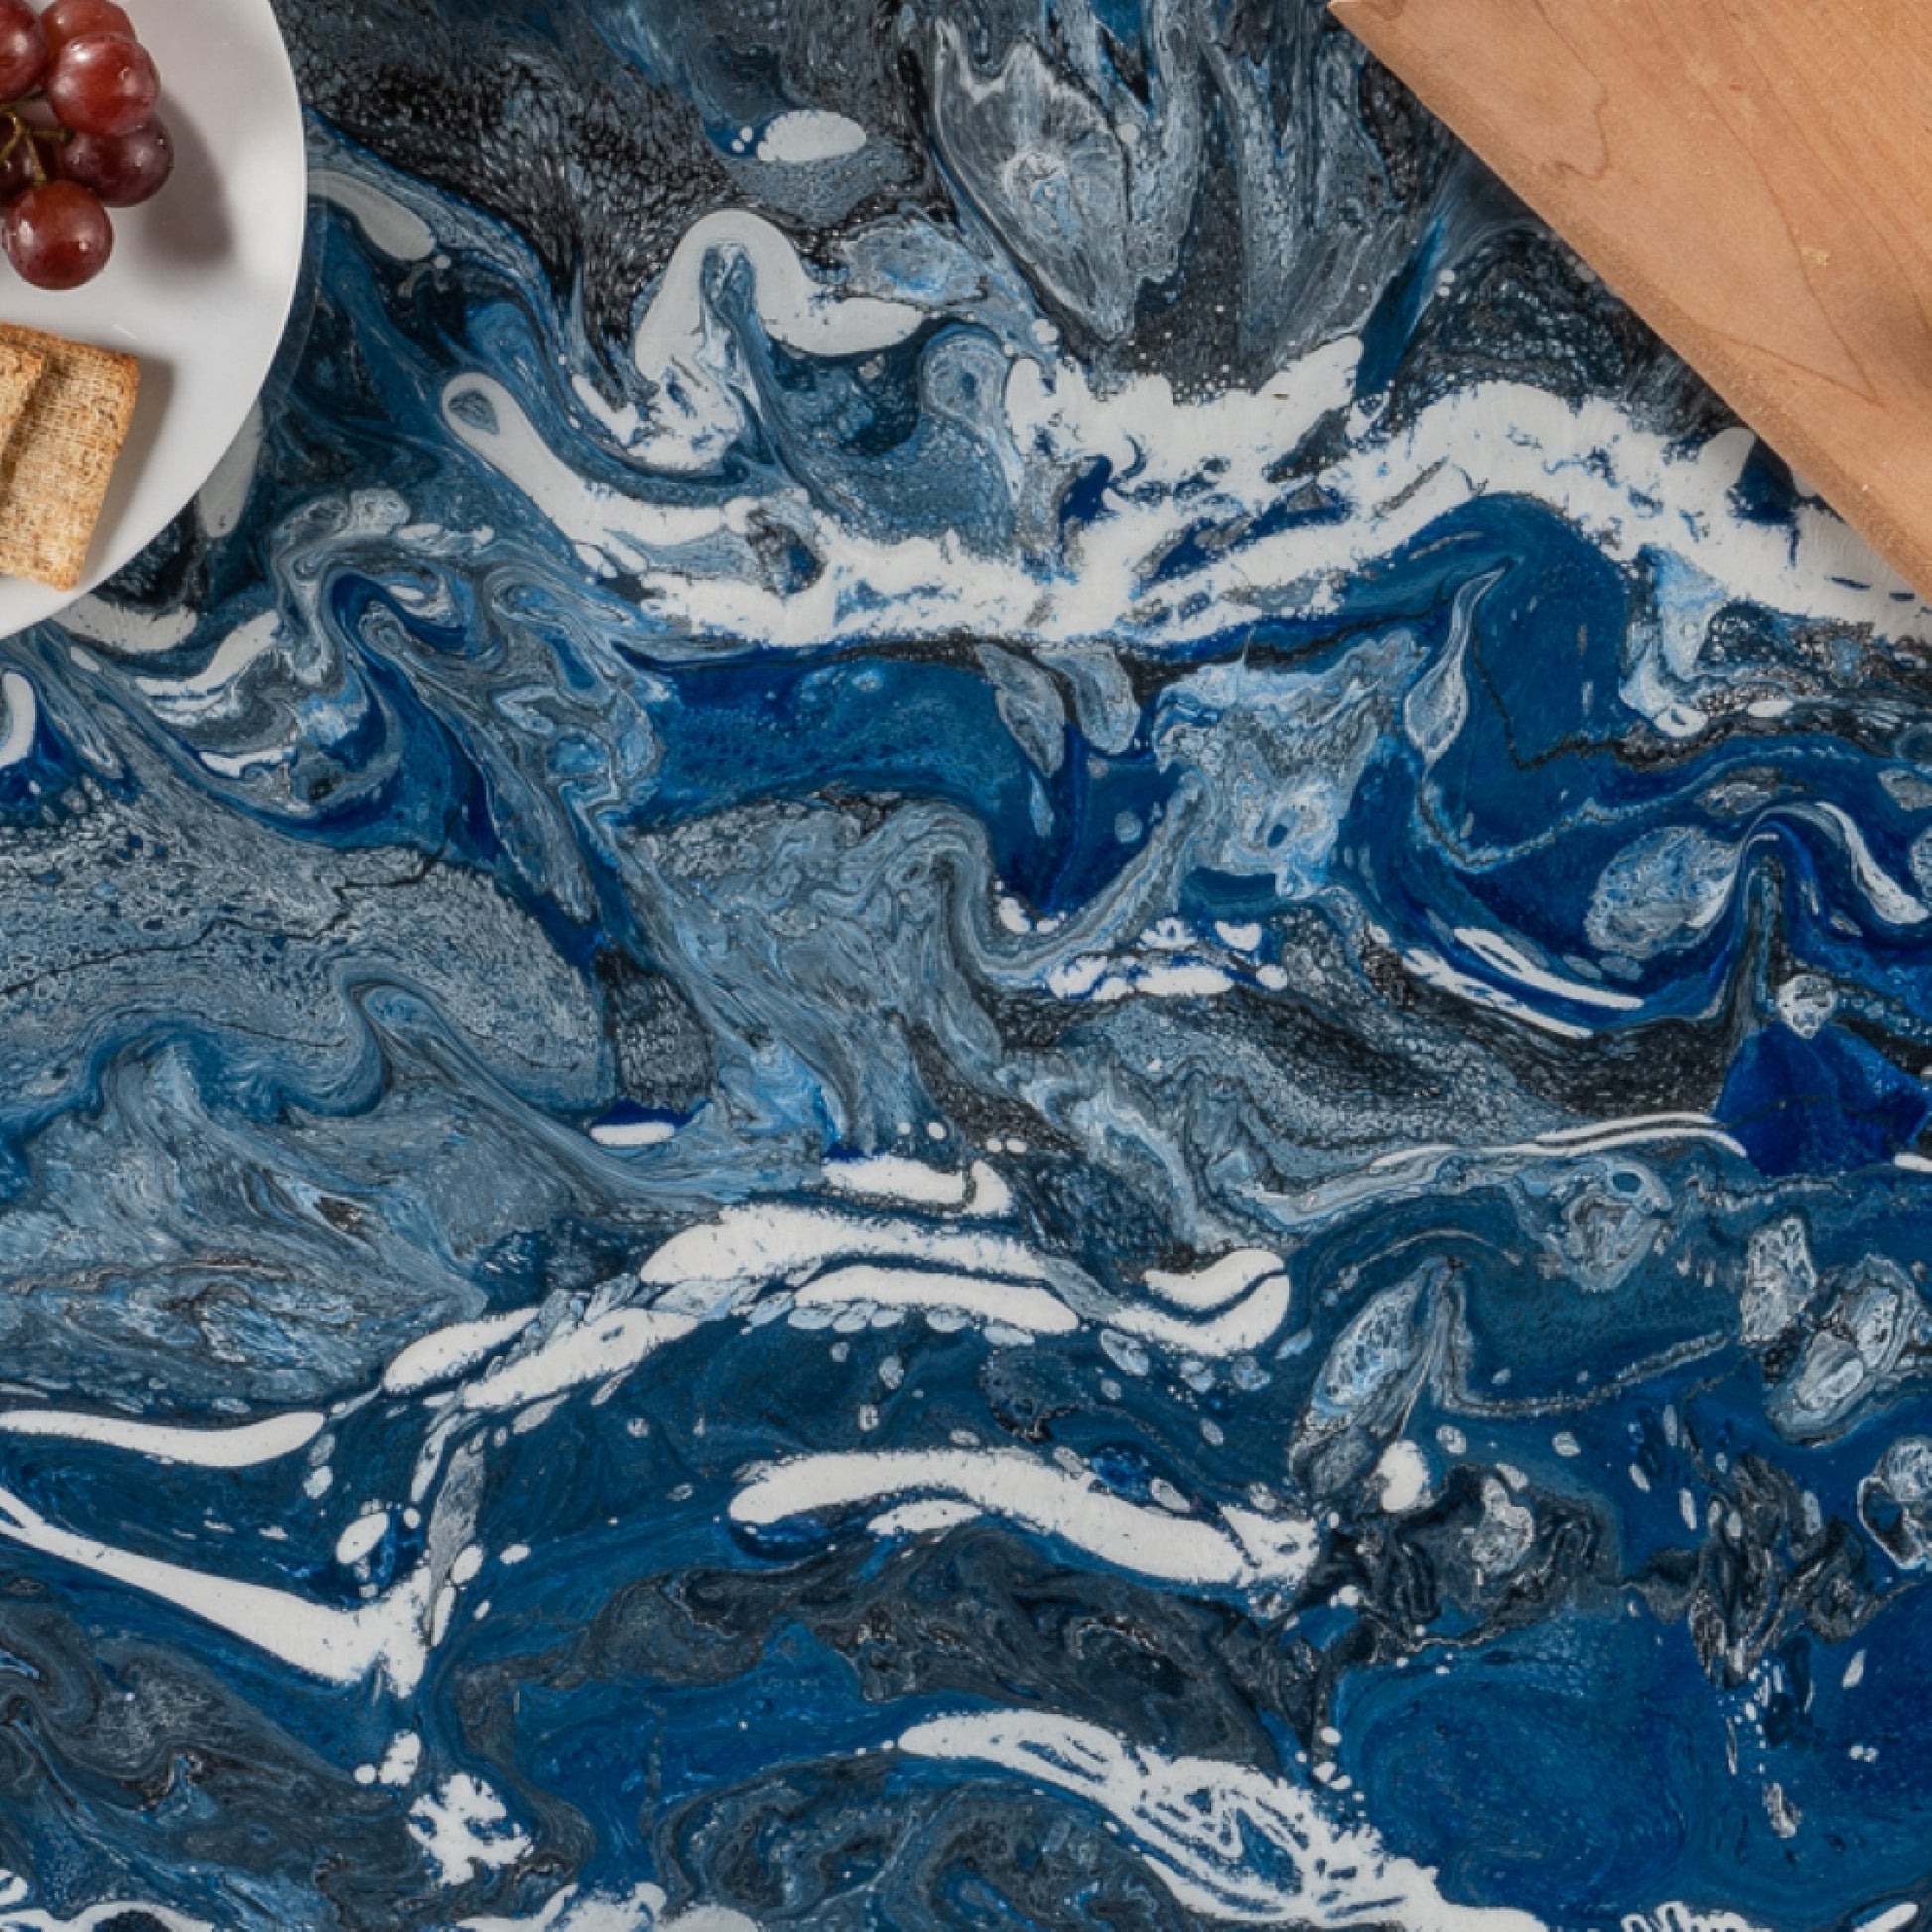 Functional Artistry - Resurface All or Part with BLUE MOUNTAIN Resin Countertop Kit